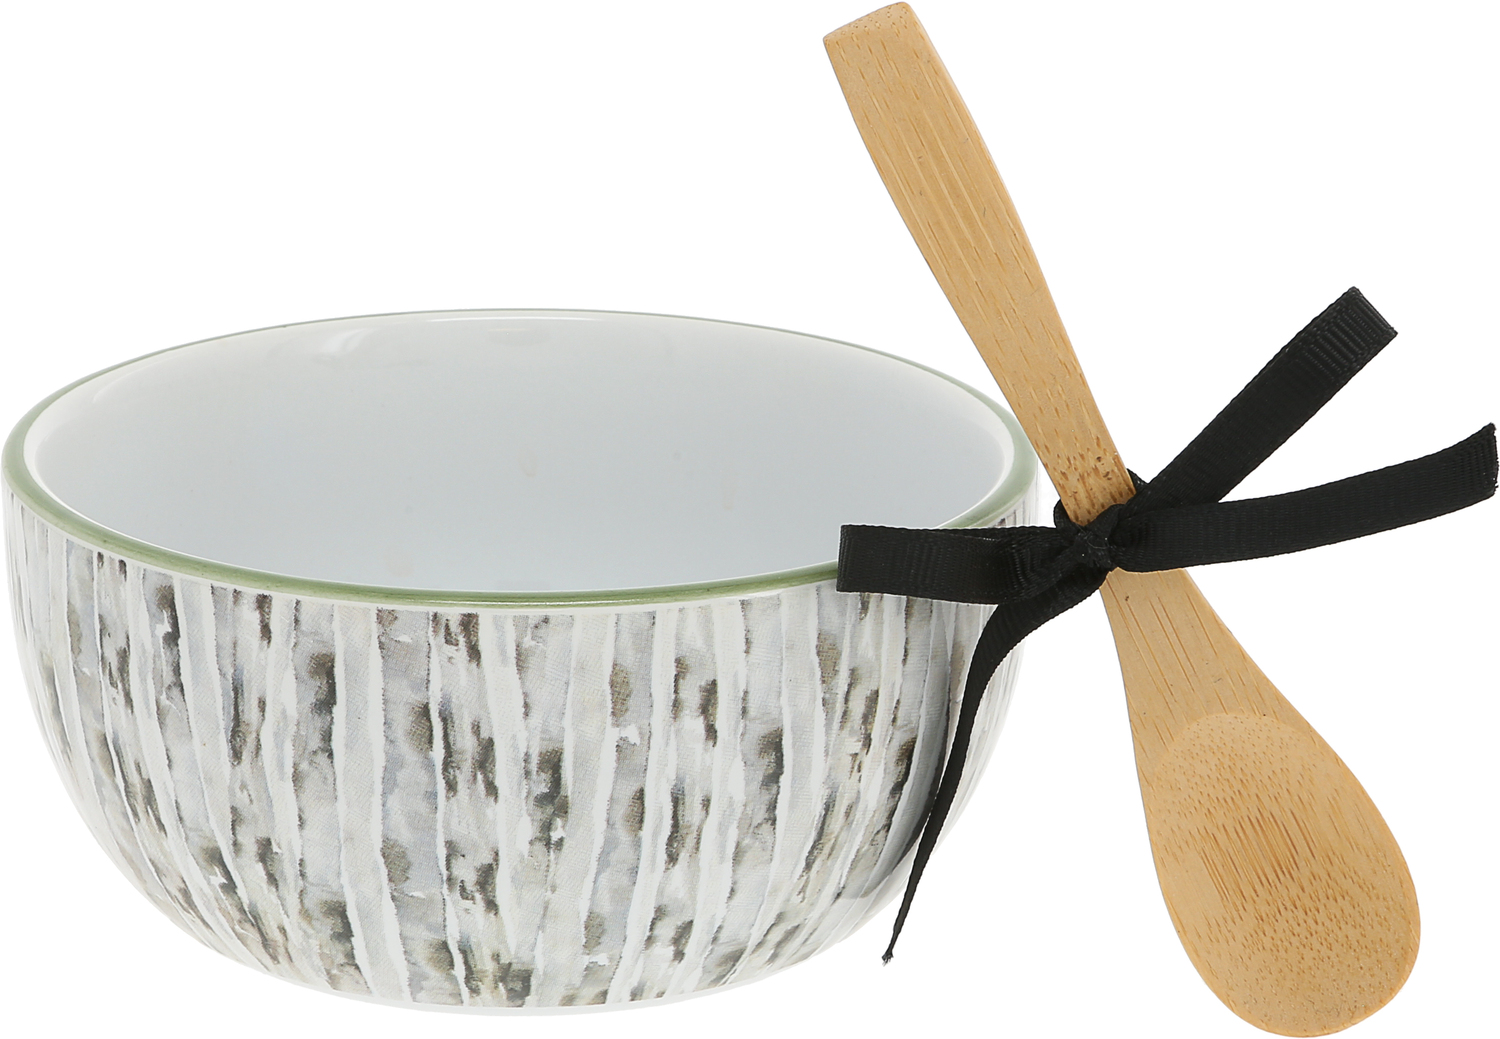 Memories by Wild Woods Lodge - Memories - 4.5" Ceramic Bowl with Bamboo Spoon